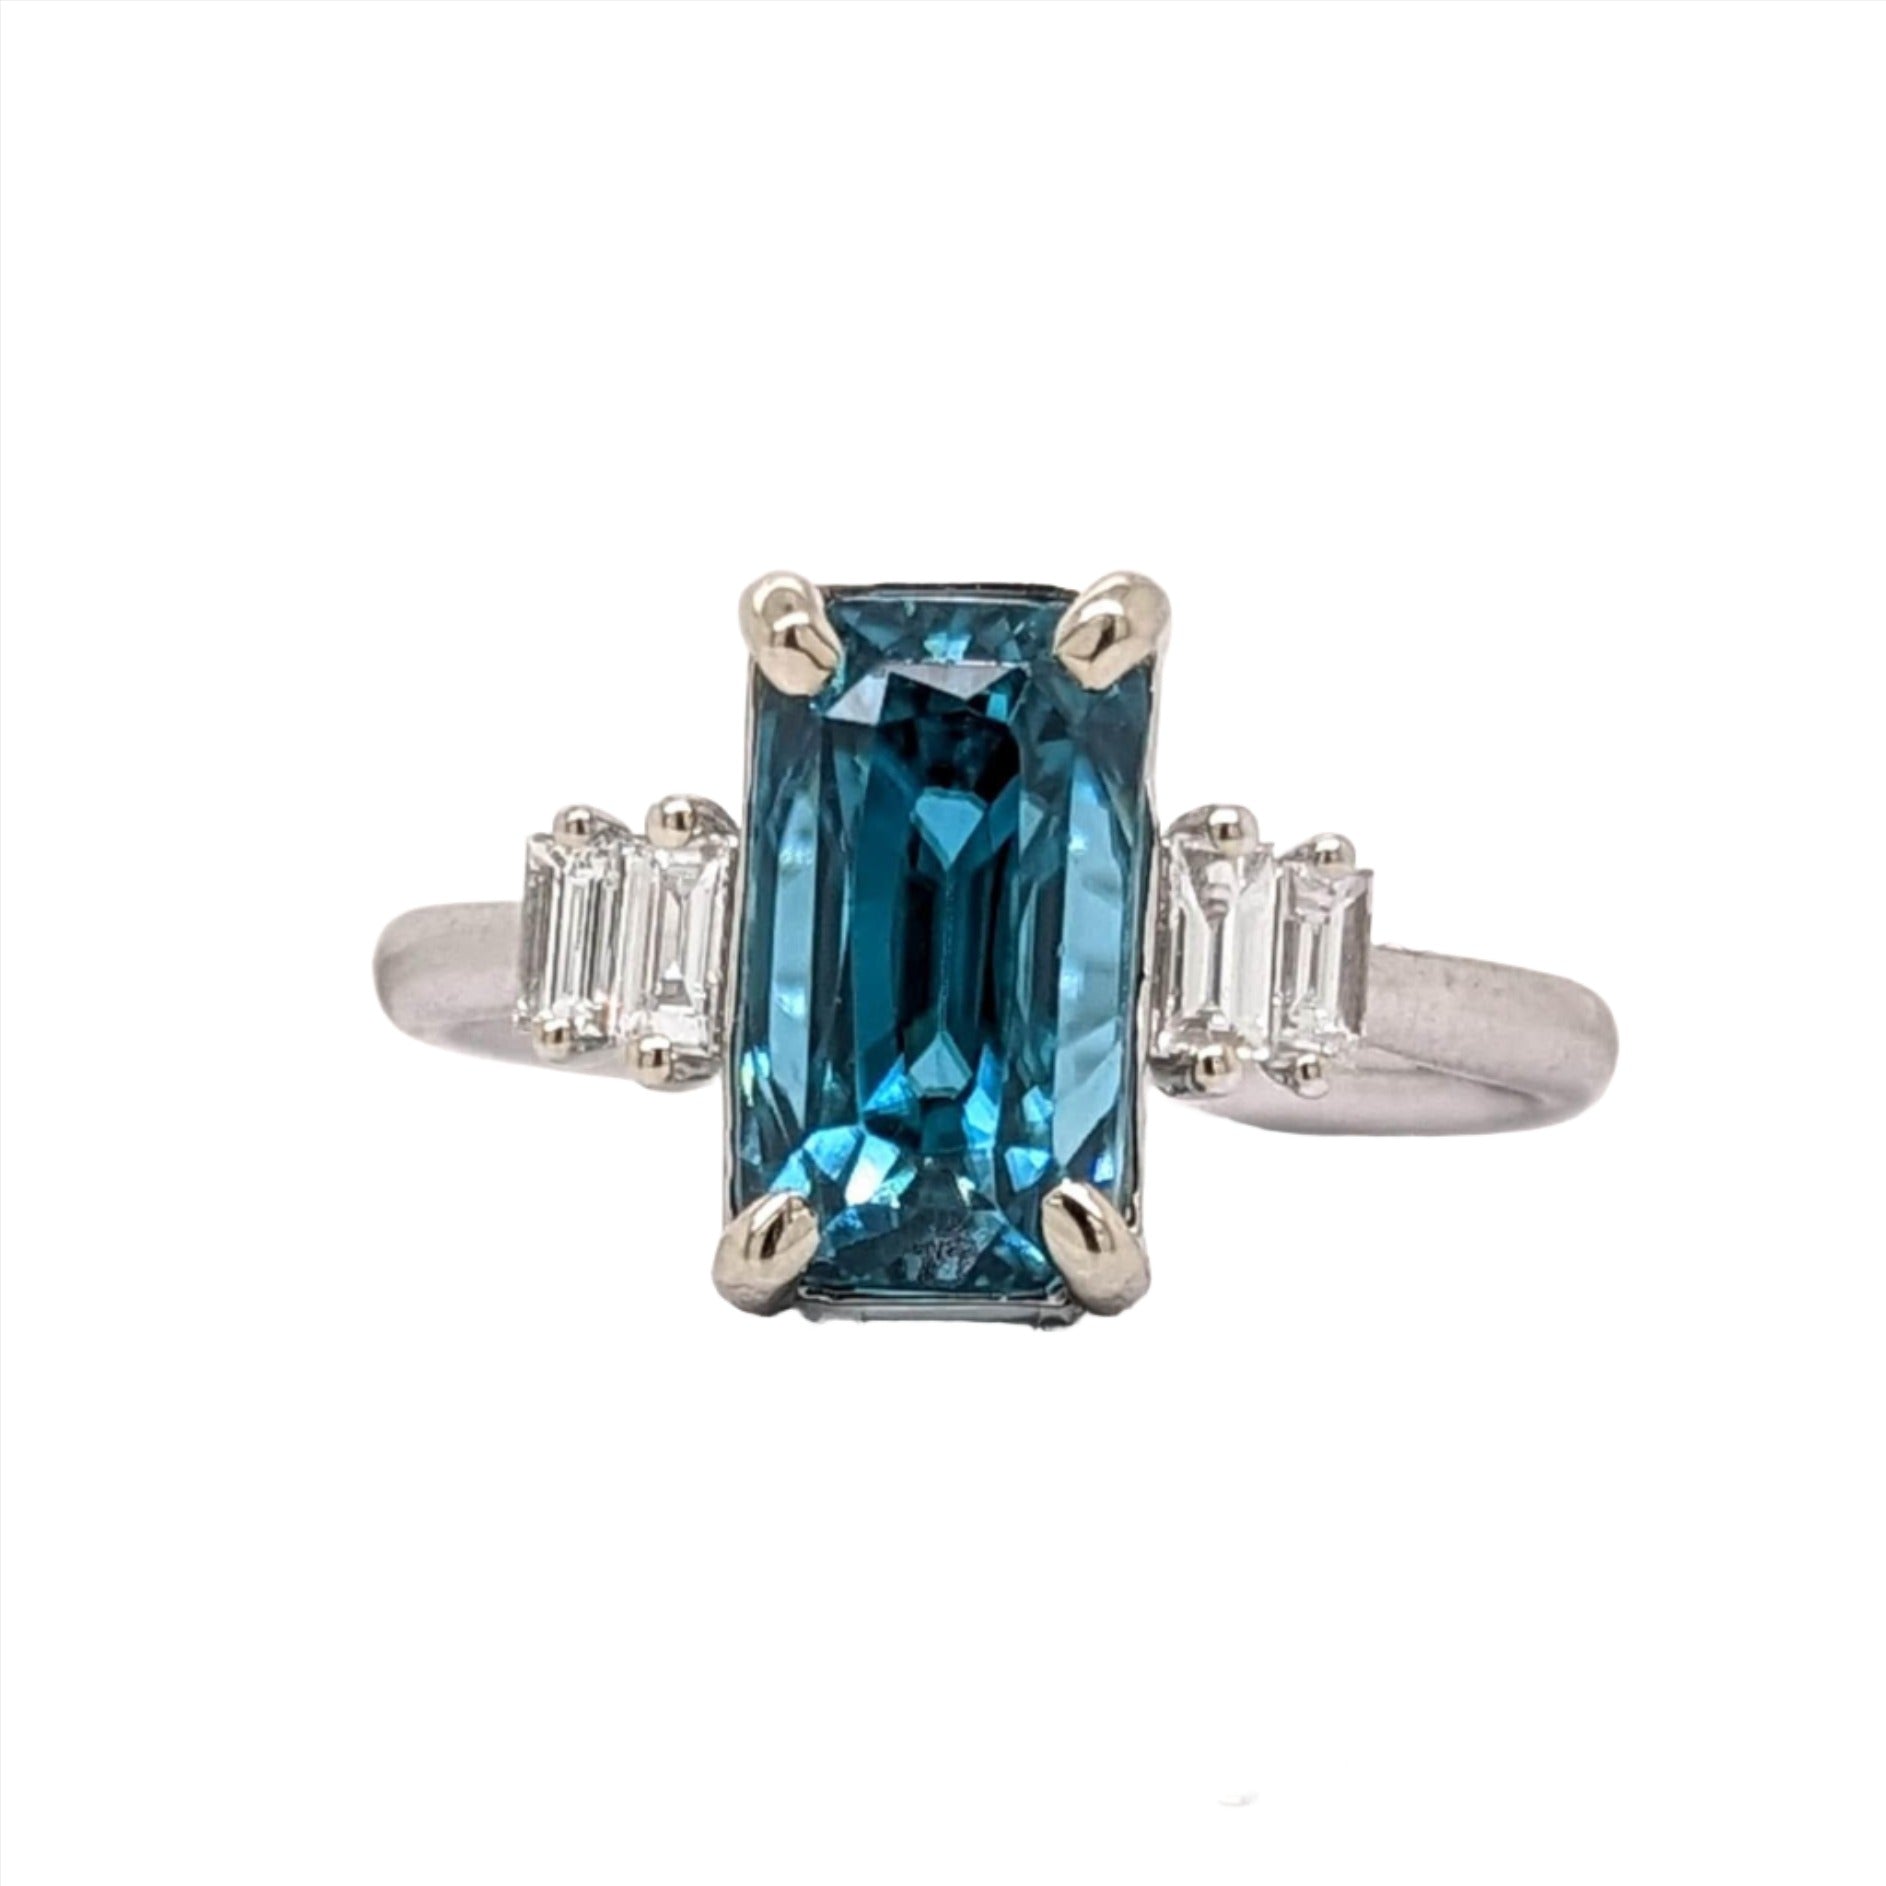 5ct Blue Zircon Ring w Natural Diamond Accents in Solid 14K White Gold EM 10x6mm